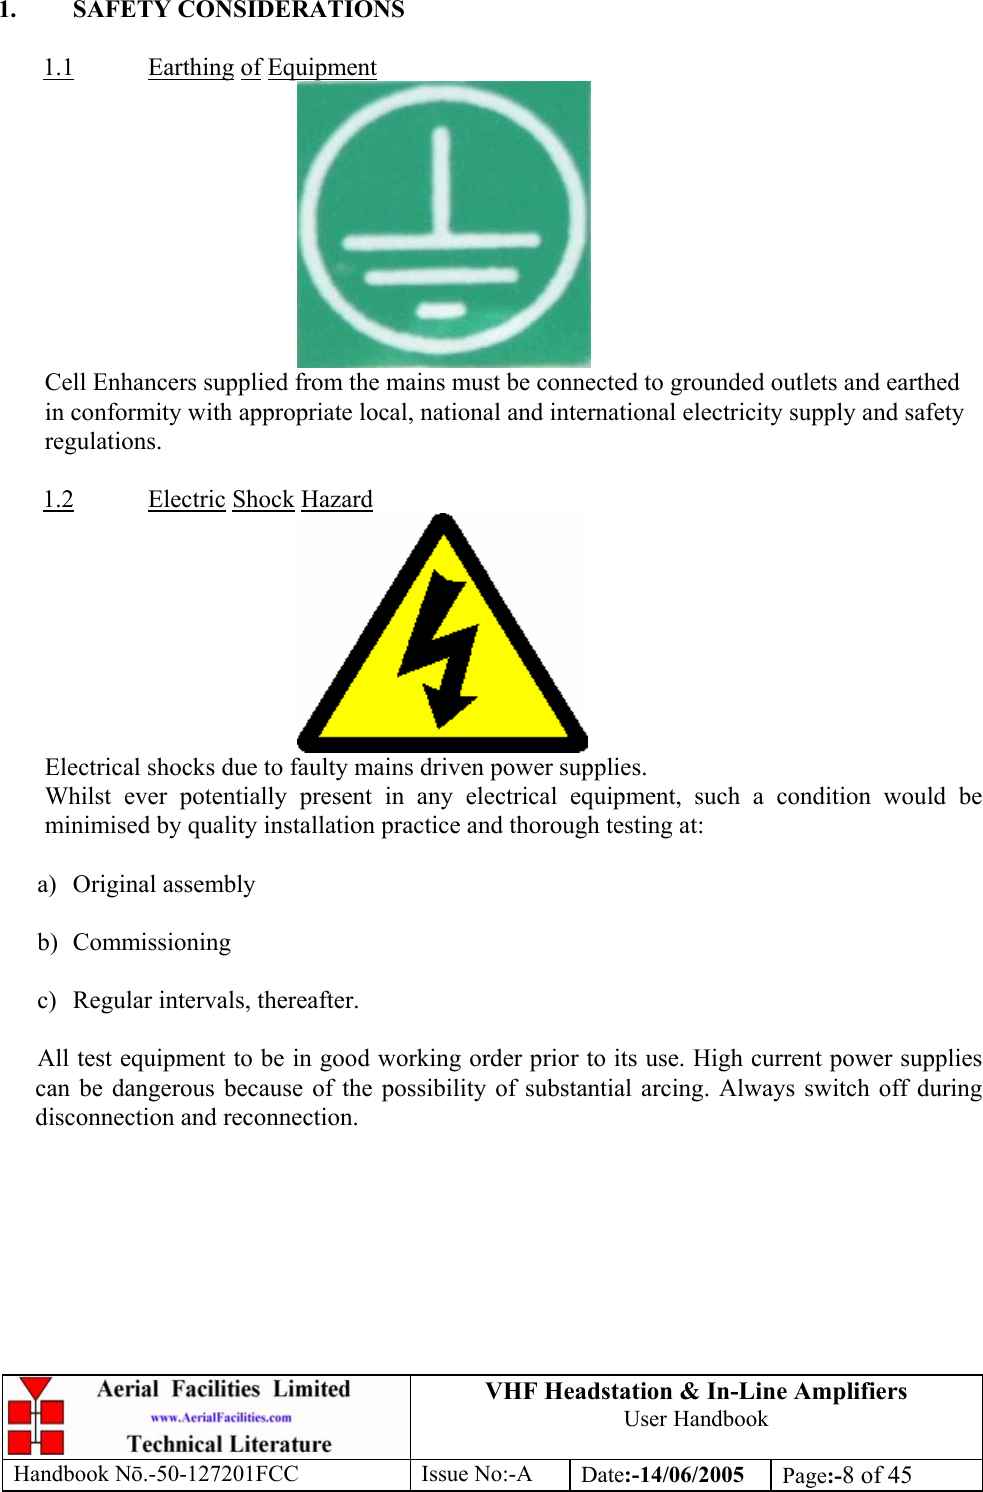 VHF Headstation &amp; In-Line Amplifiers User Handbook Handbook Nō.-50-127201FCC Issue No:-A Date:-14/06/2005  Page:-8 of 45   1. SAFETY CONSIDERATIONS  1.1 Earthing of Equipment  Cell Enhancers supplied from the mains must be connected to grounded outlets and earthed in conformity with appropriate local, national and international electricity supply and safety regulations.  1.2 Electric Shock Hazard  Electrical shocks due to faulty mains driven power supplies. Whilst ever potentially present in any electrical equipment, such a condition would be minimised by quality installation practice and thorough testing at:  a) Original assembly  b) Commissioning  c)  Regular intervals, thereafter.  All test equipment to be in good working order prior to its use. High current power supplies can be dangerous because of the possibility of substantial arcing. Always switch off during disconnection and reconnection.  